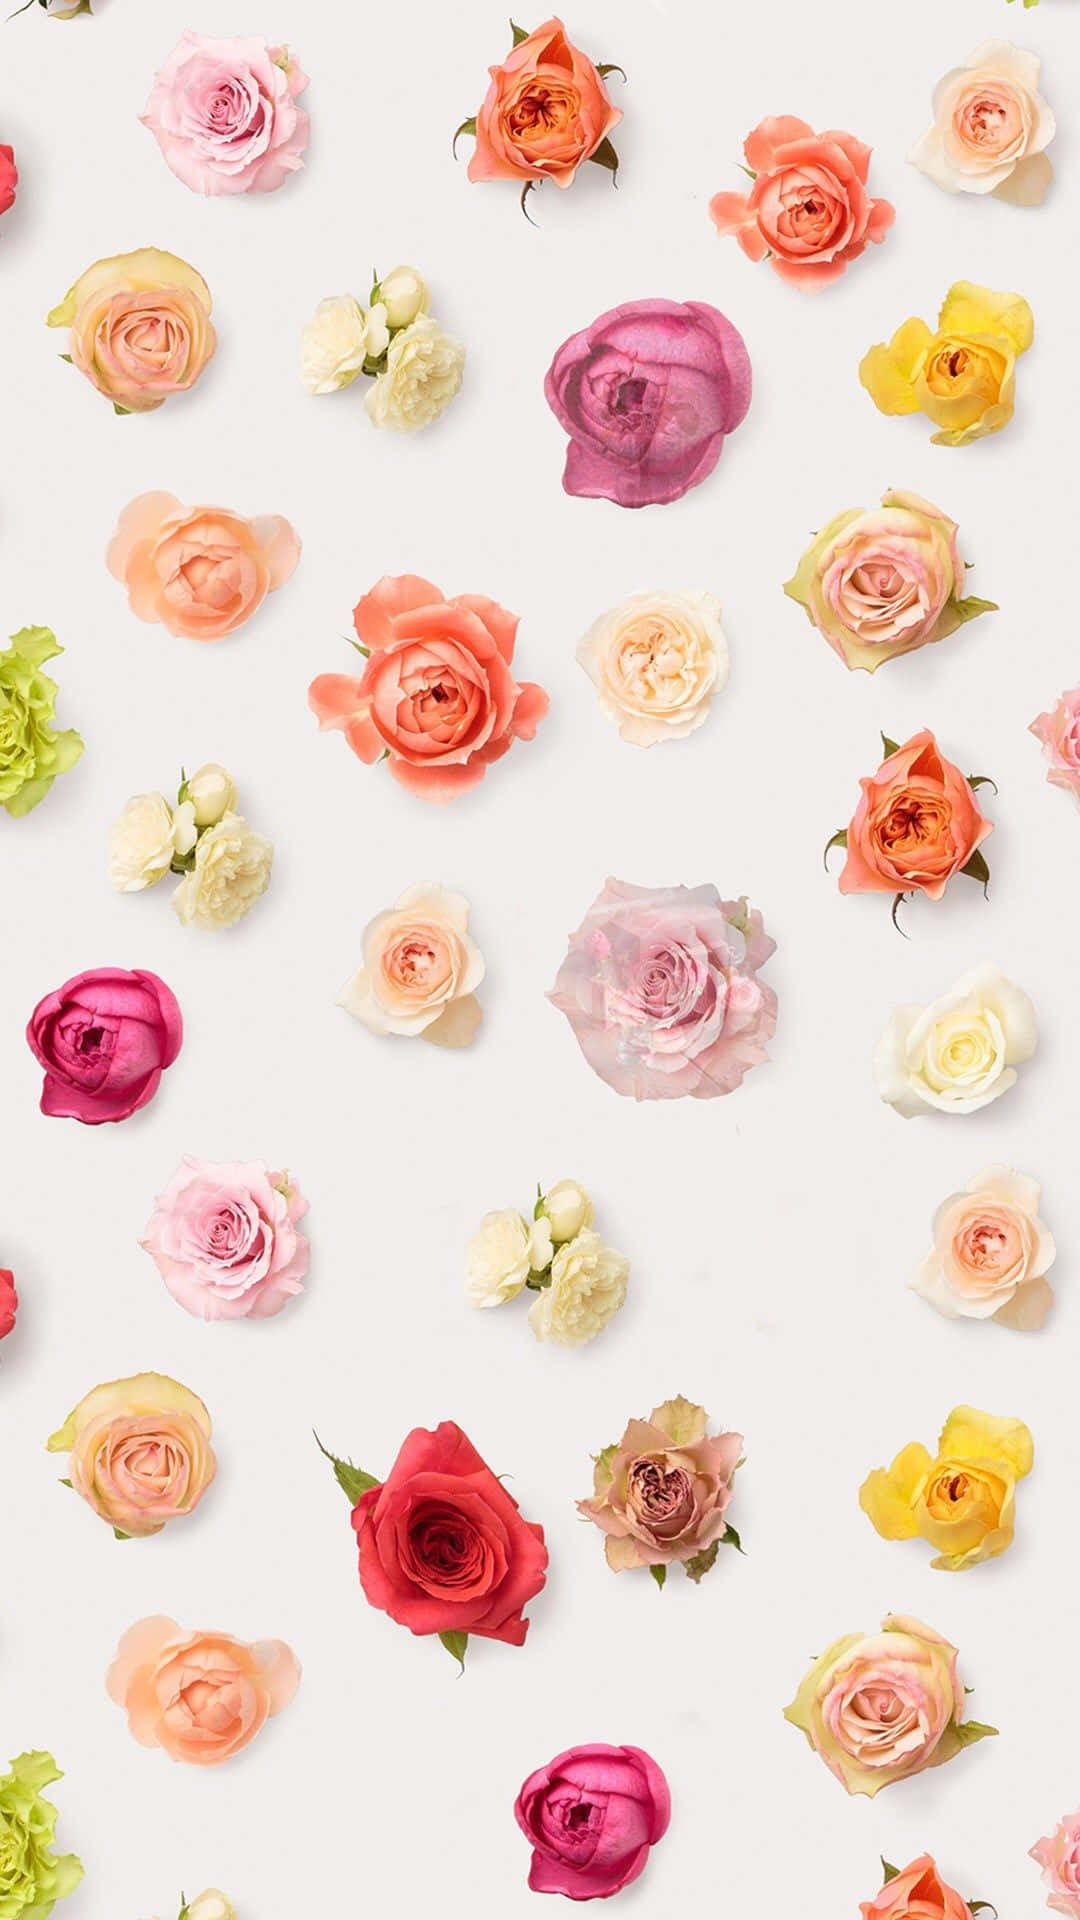 Brighten Up Your Day With a Colorful Flowers Iphone Wallpaper